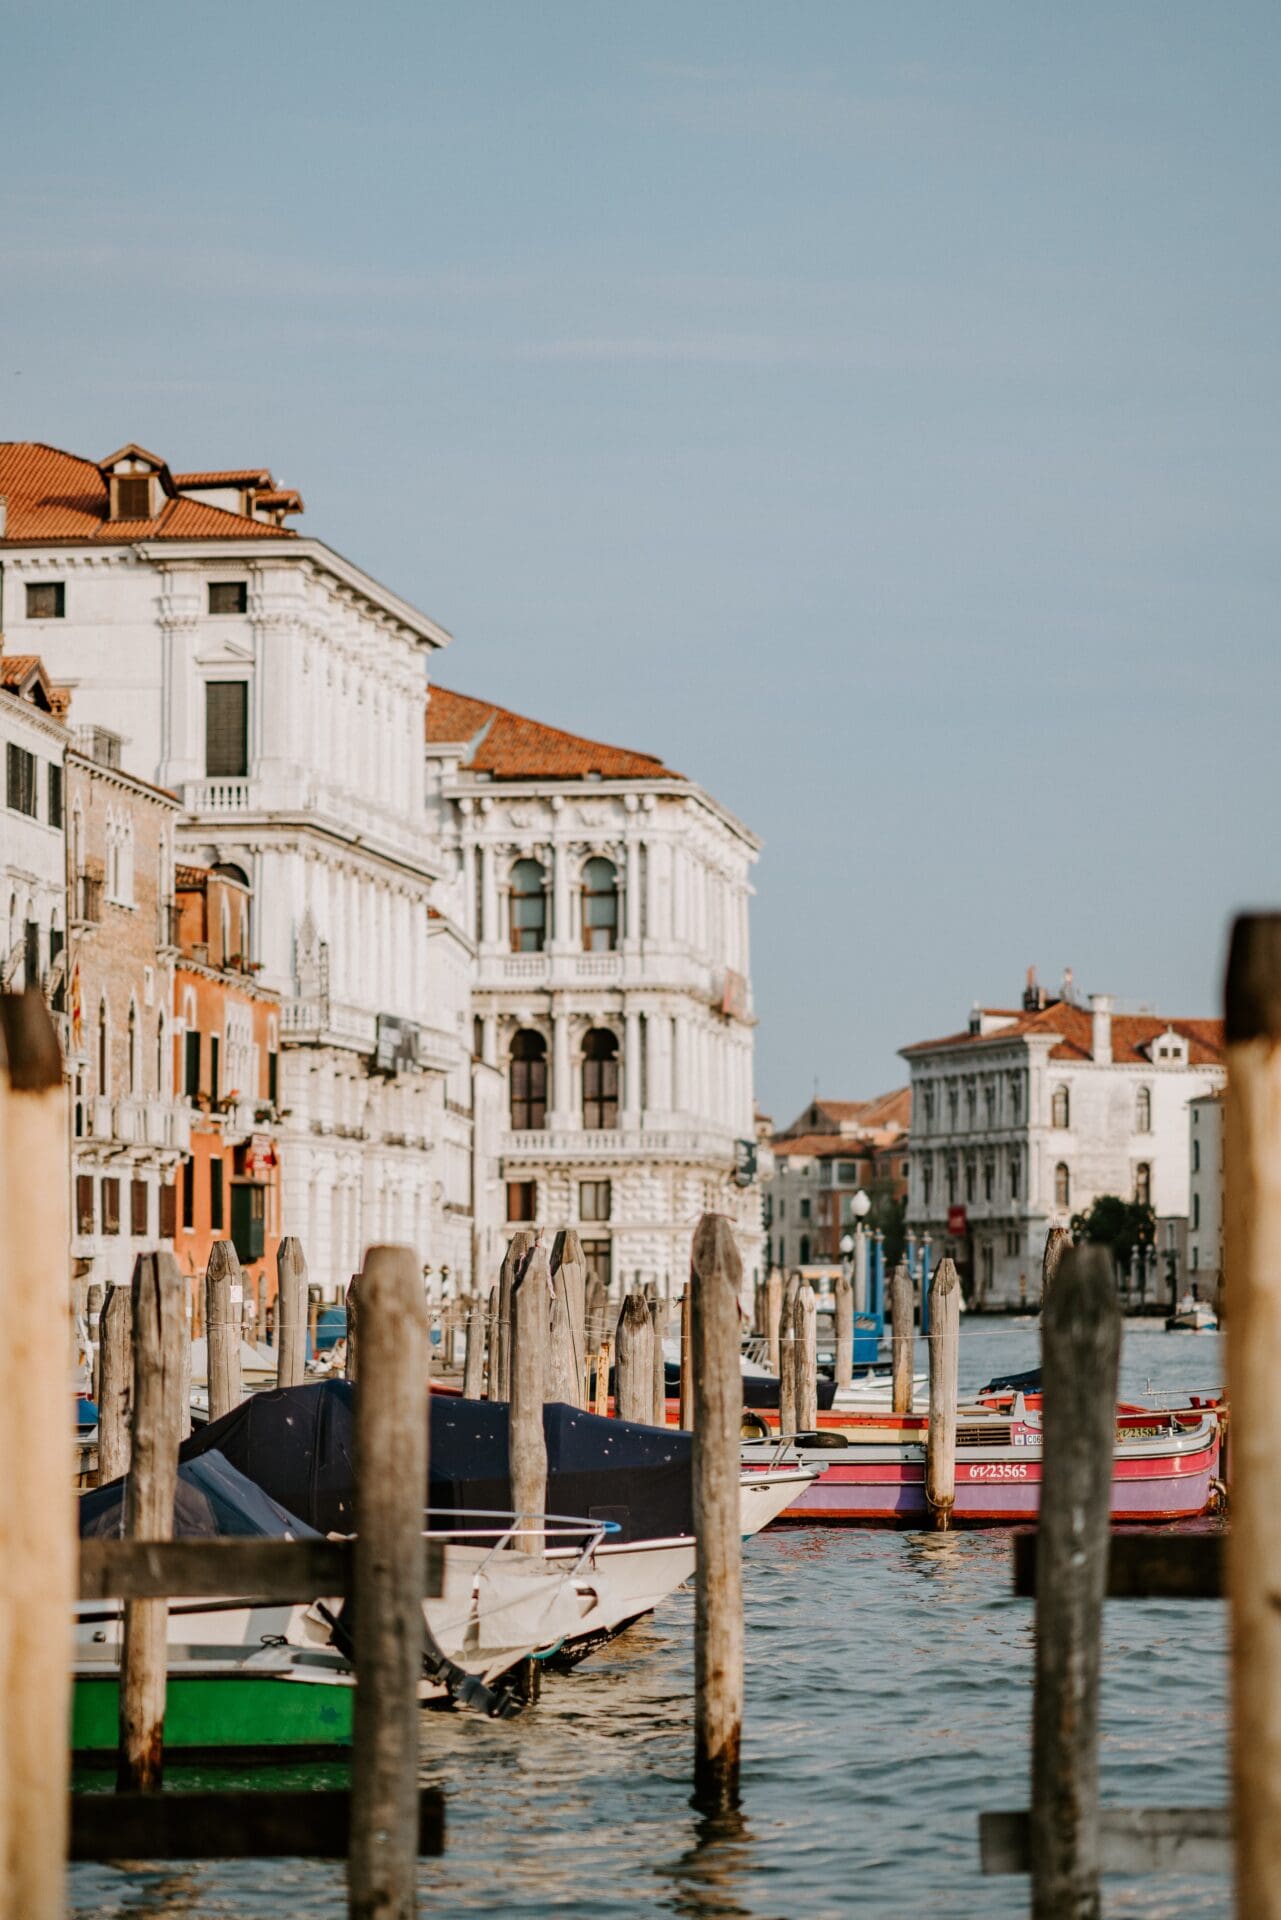 Running in Venice | A view over the harbour at Venice, with wooden poles sticking out of the water in front of beautiful white renaissance-style buildings